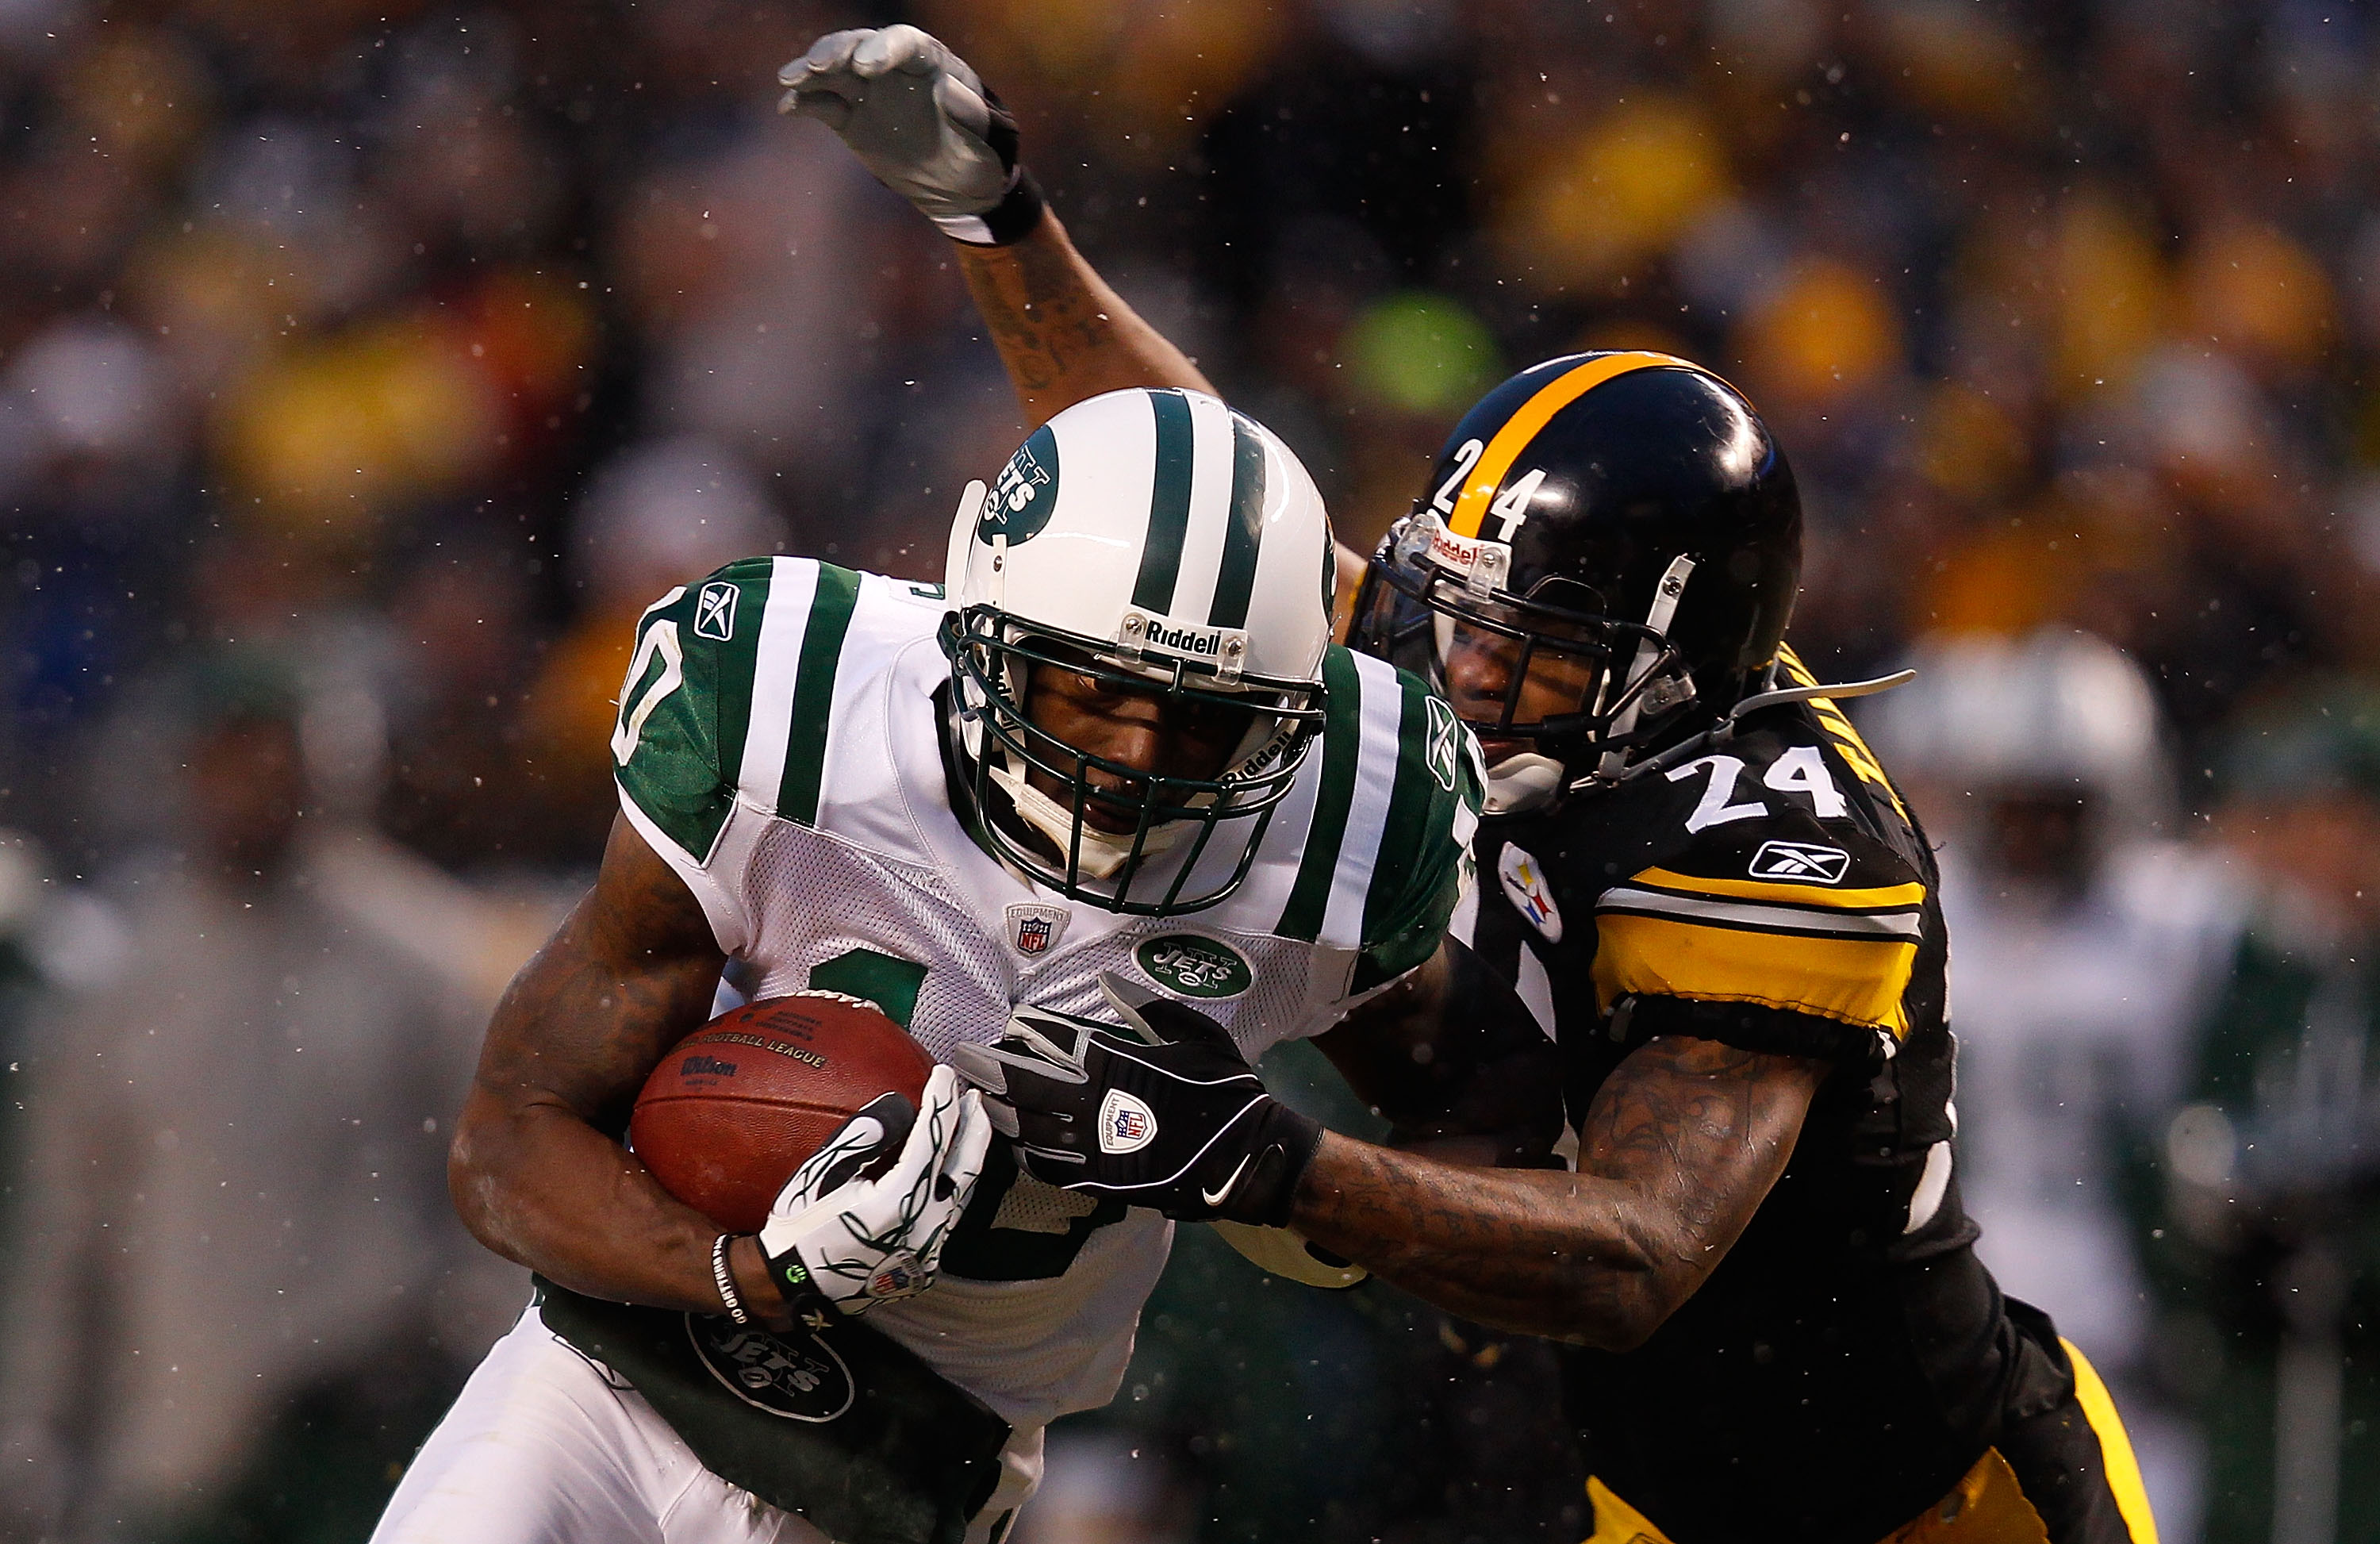 NFL Playoffs: Pittsburgh Steelers vs. New York Jets Preview